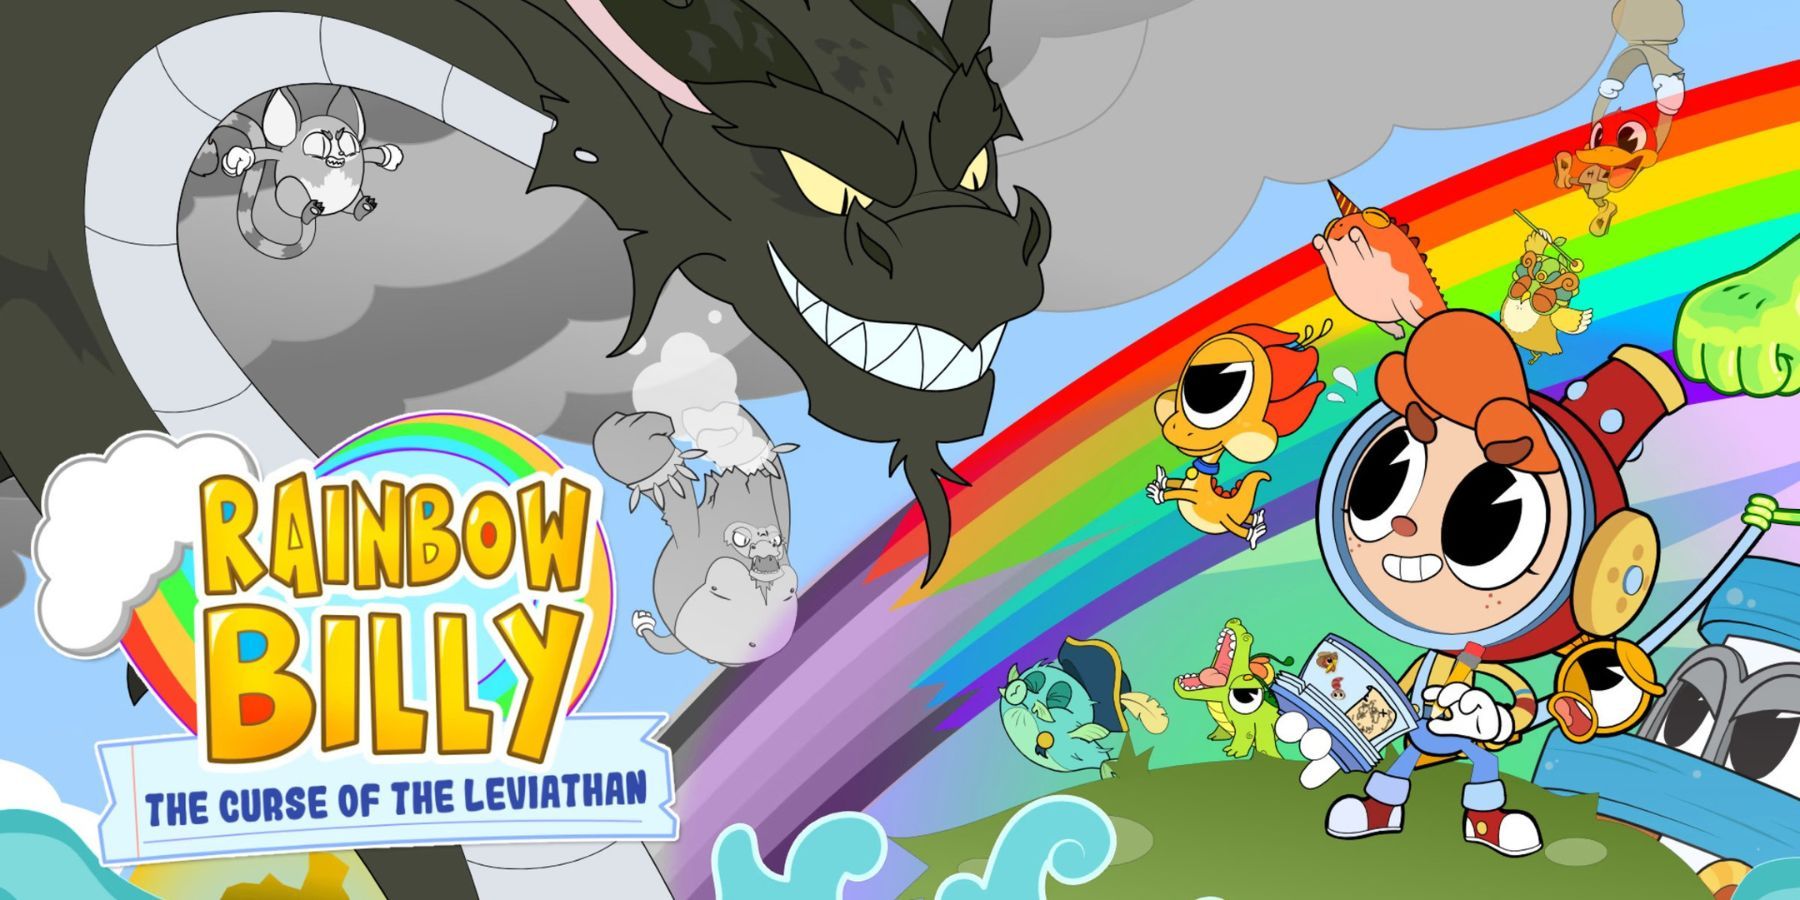 rainbow billy the curse of the leviathan cover art.